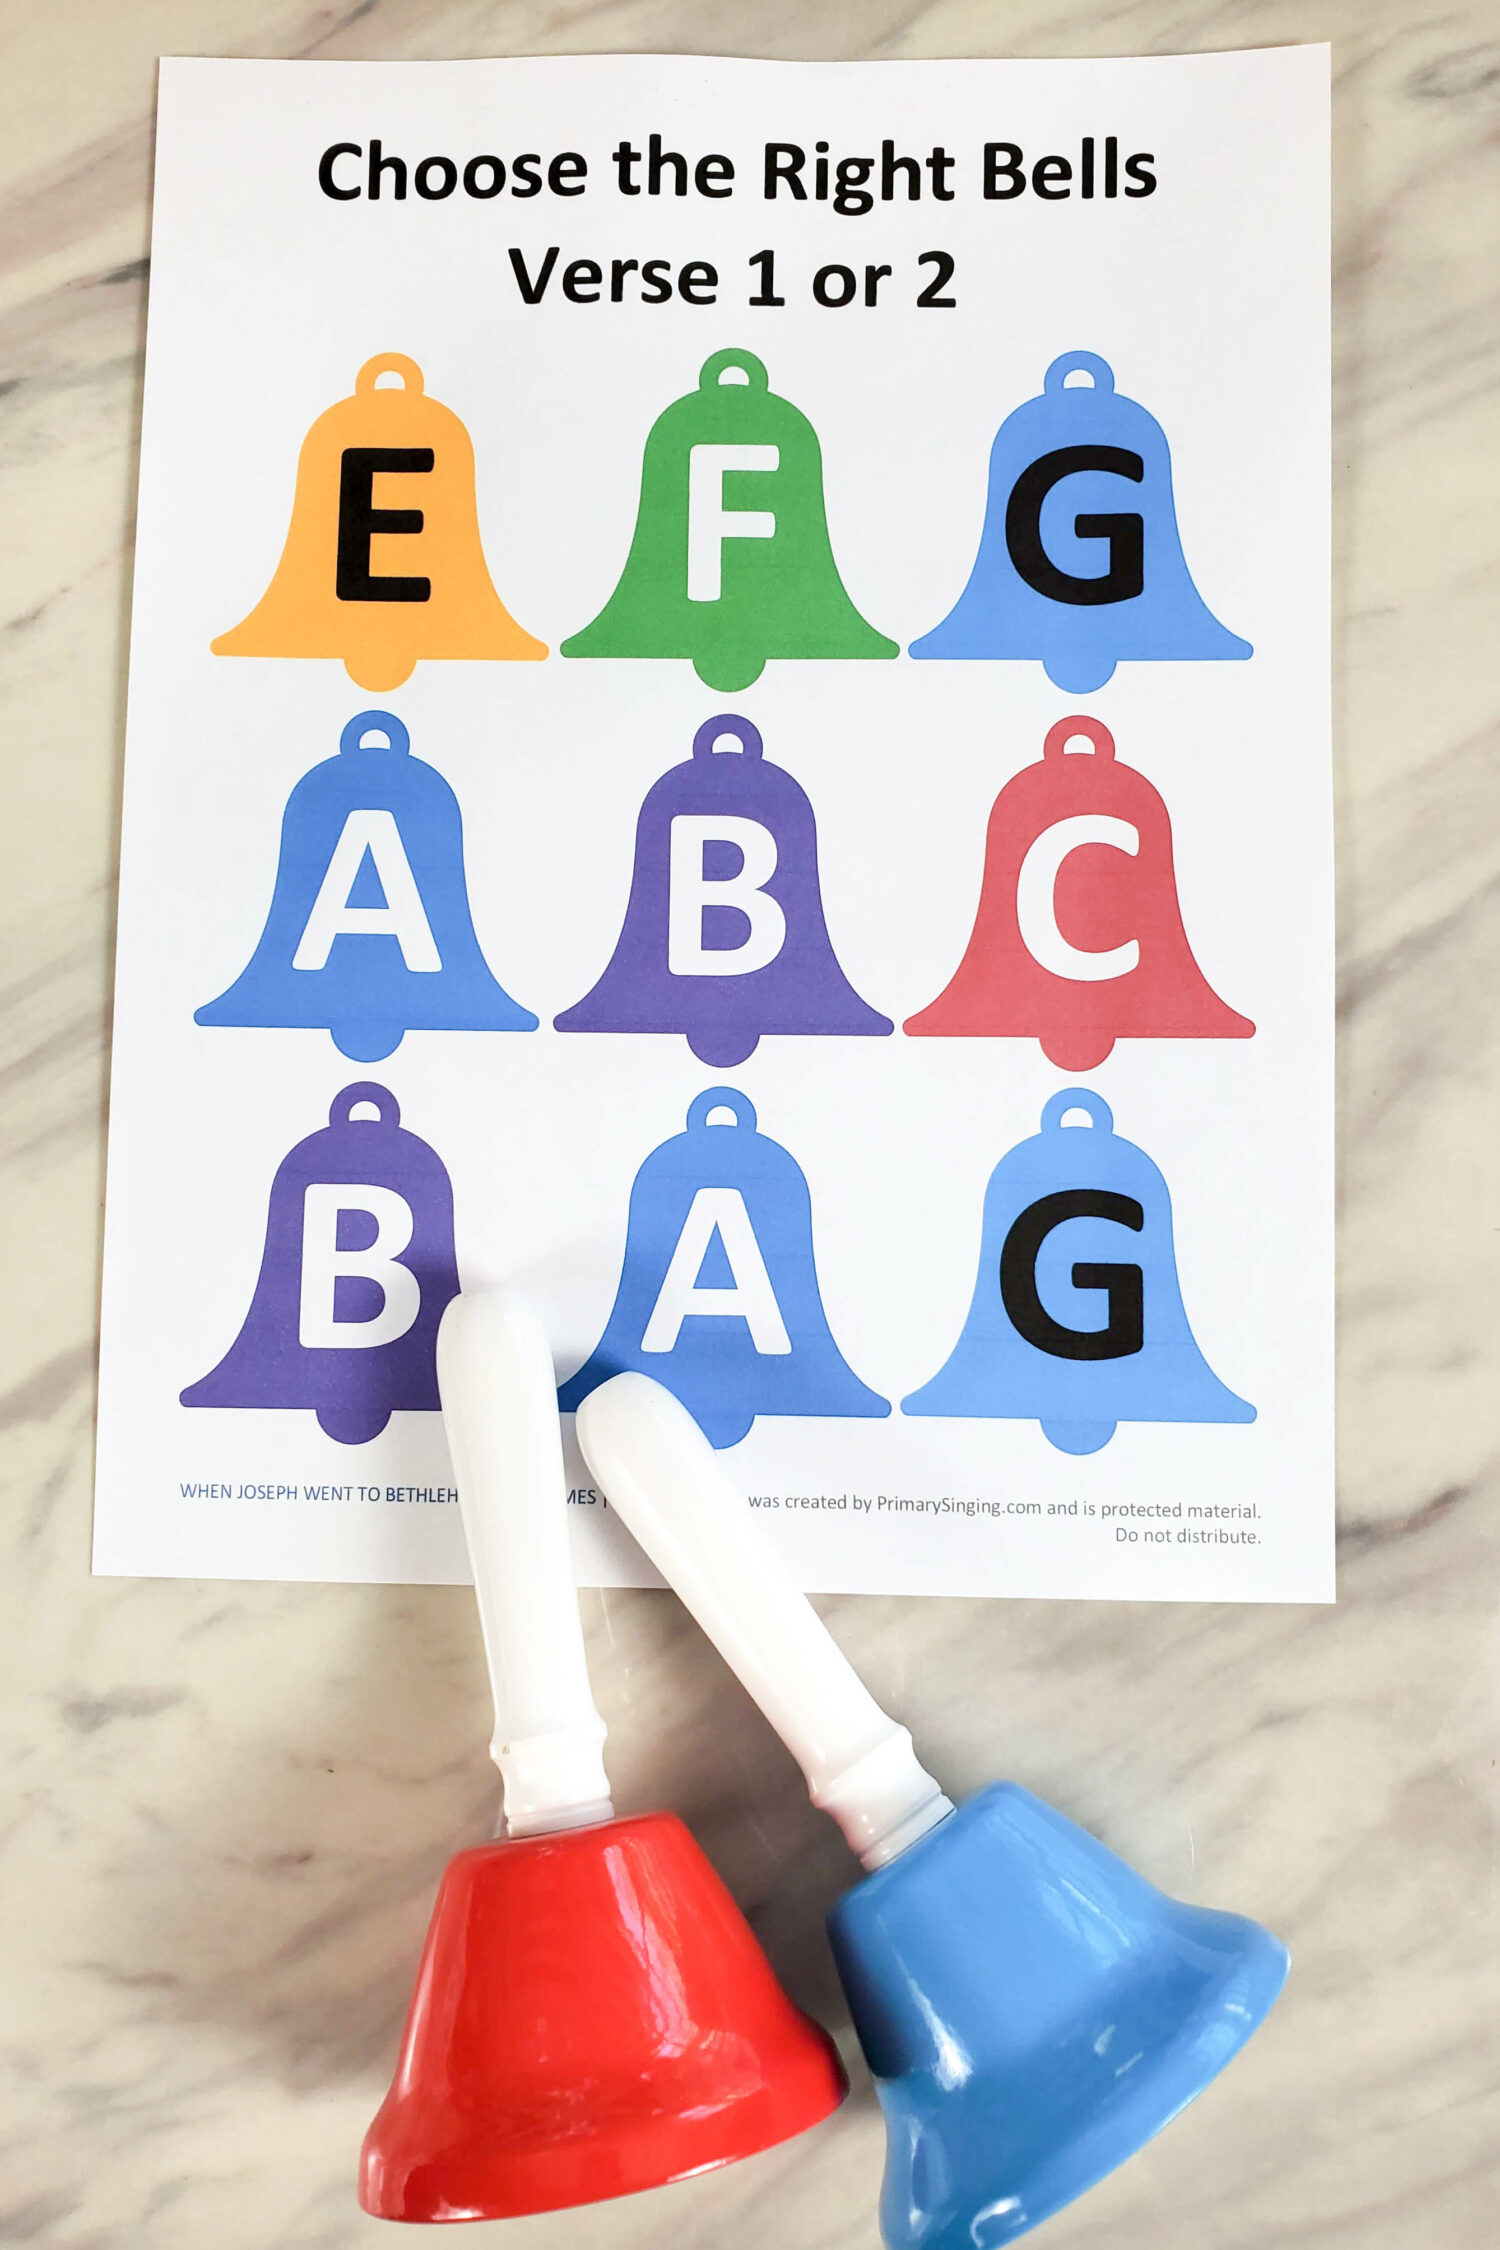 Choose the Right Chimes & Bells singing time idea! Head over to grab this printable pipe chime and hand bells charts to help teach the LDS hymn Choose the Right in your Primary room! You can use either instrument - or both - for a fun and one of a kind singing time!